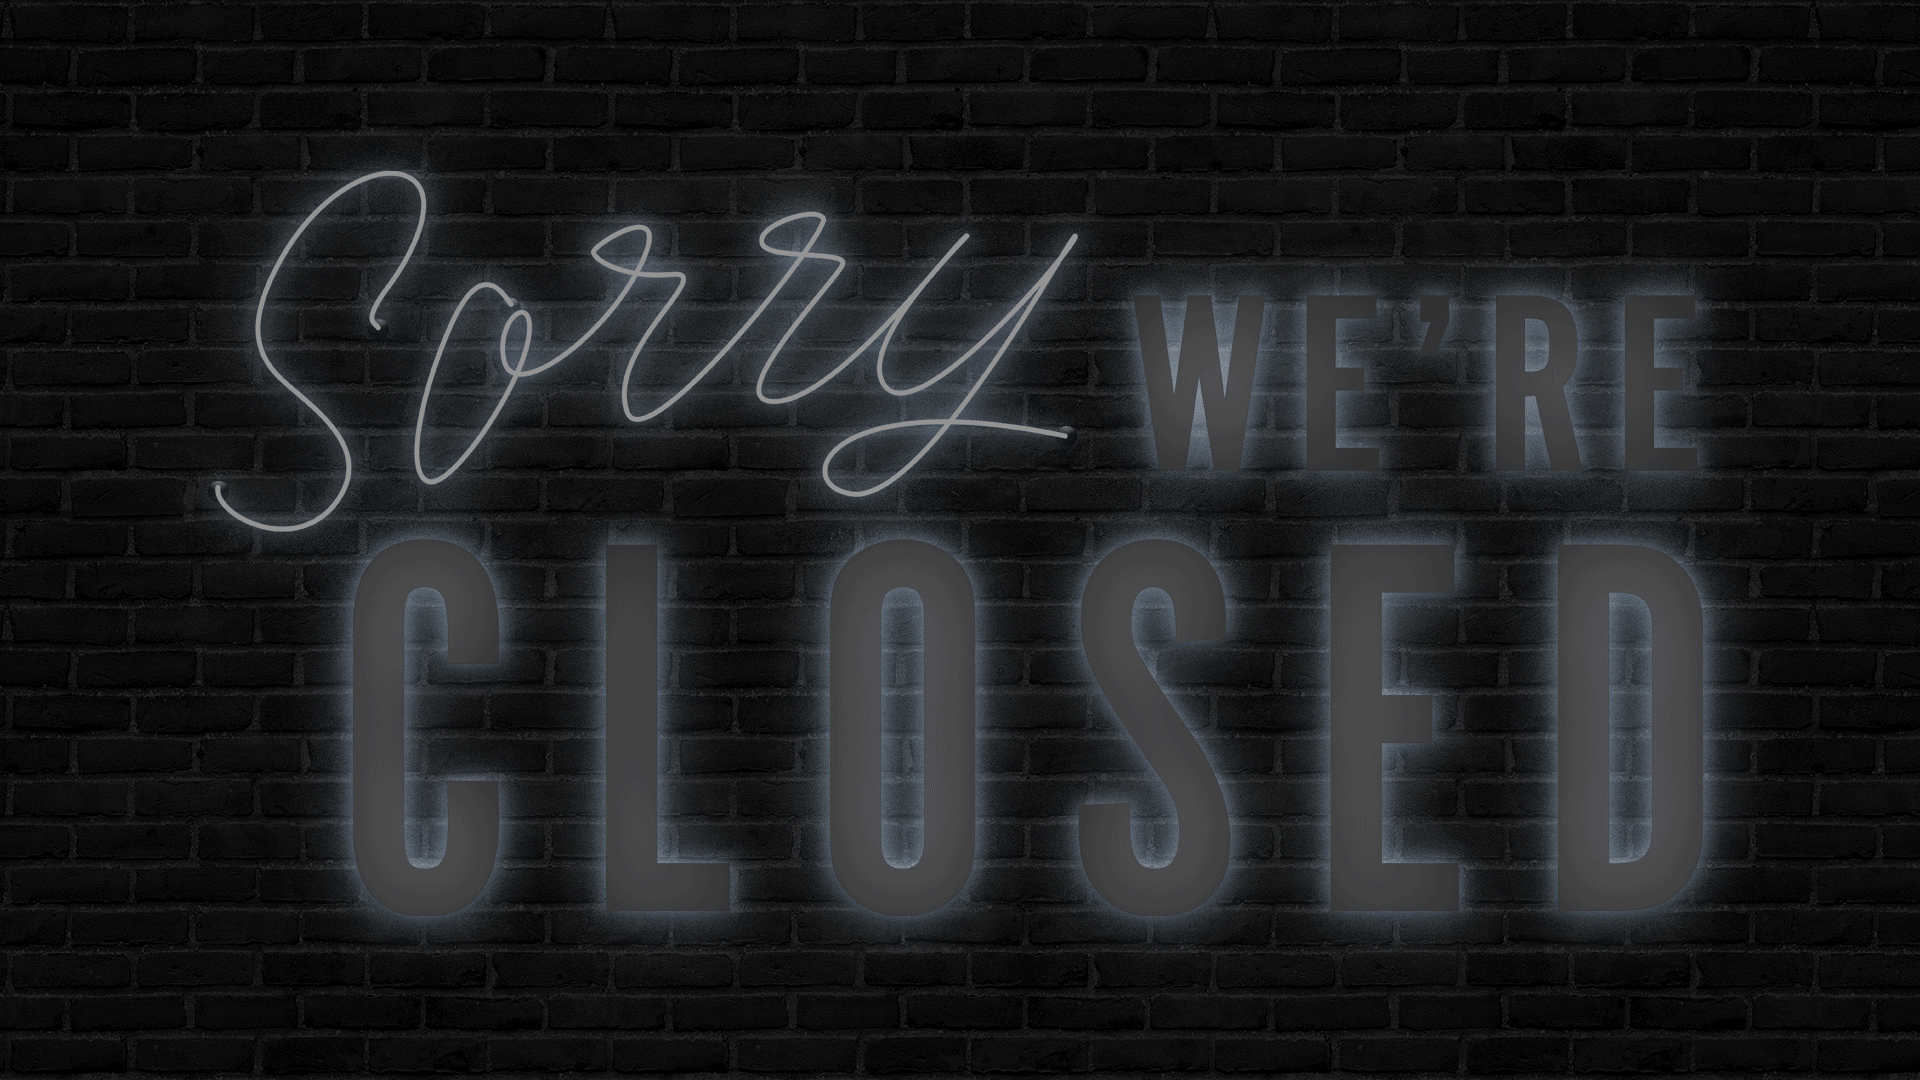 Animated illustration of a neon sign with a "Sorry We're Closed" flickering on and off. 